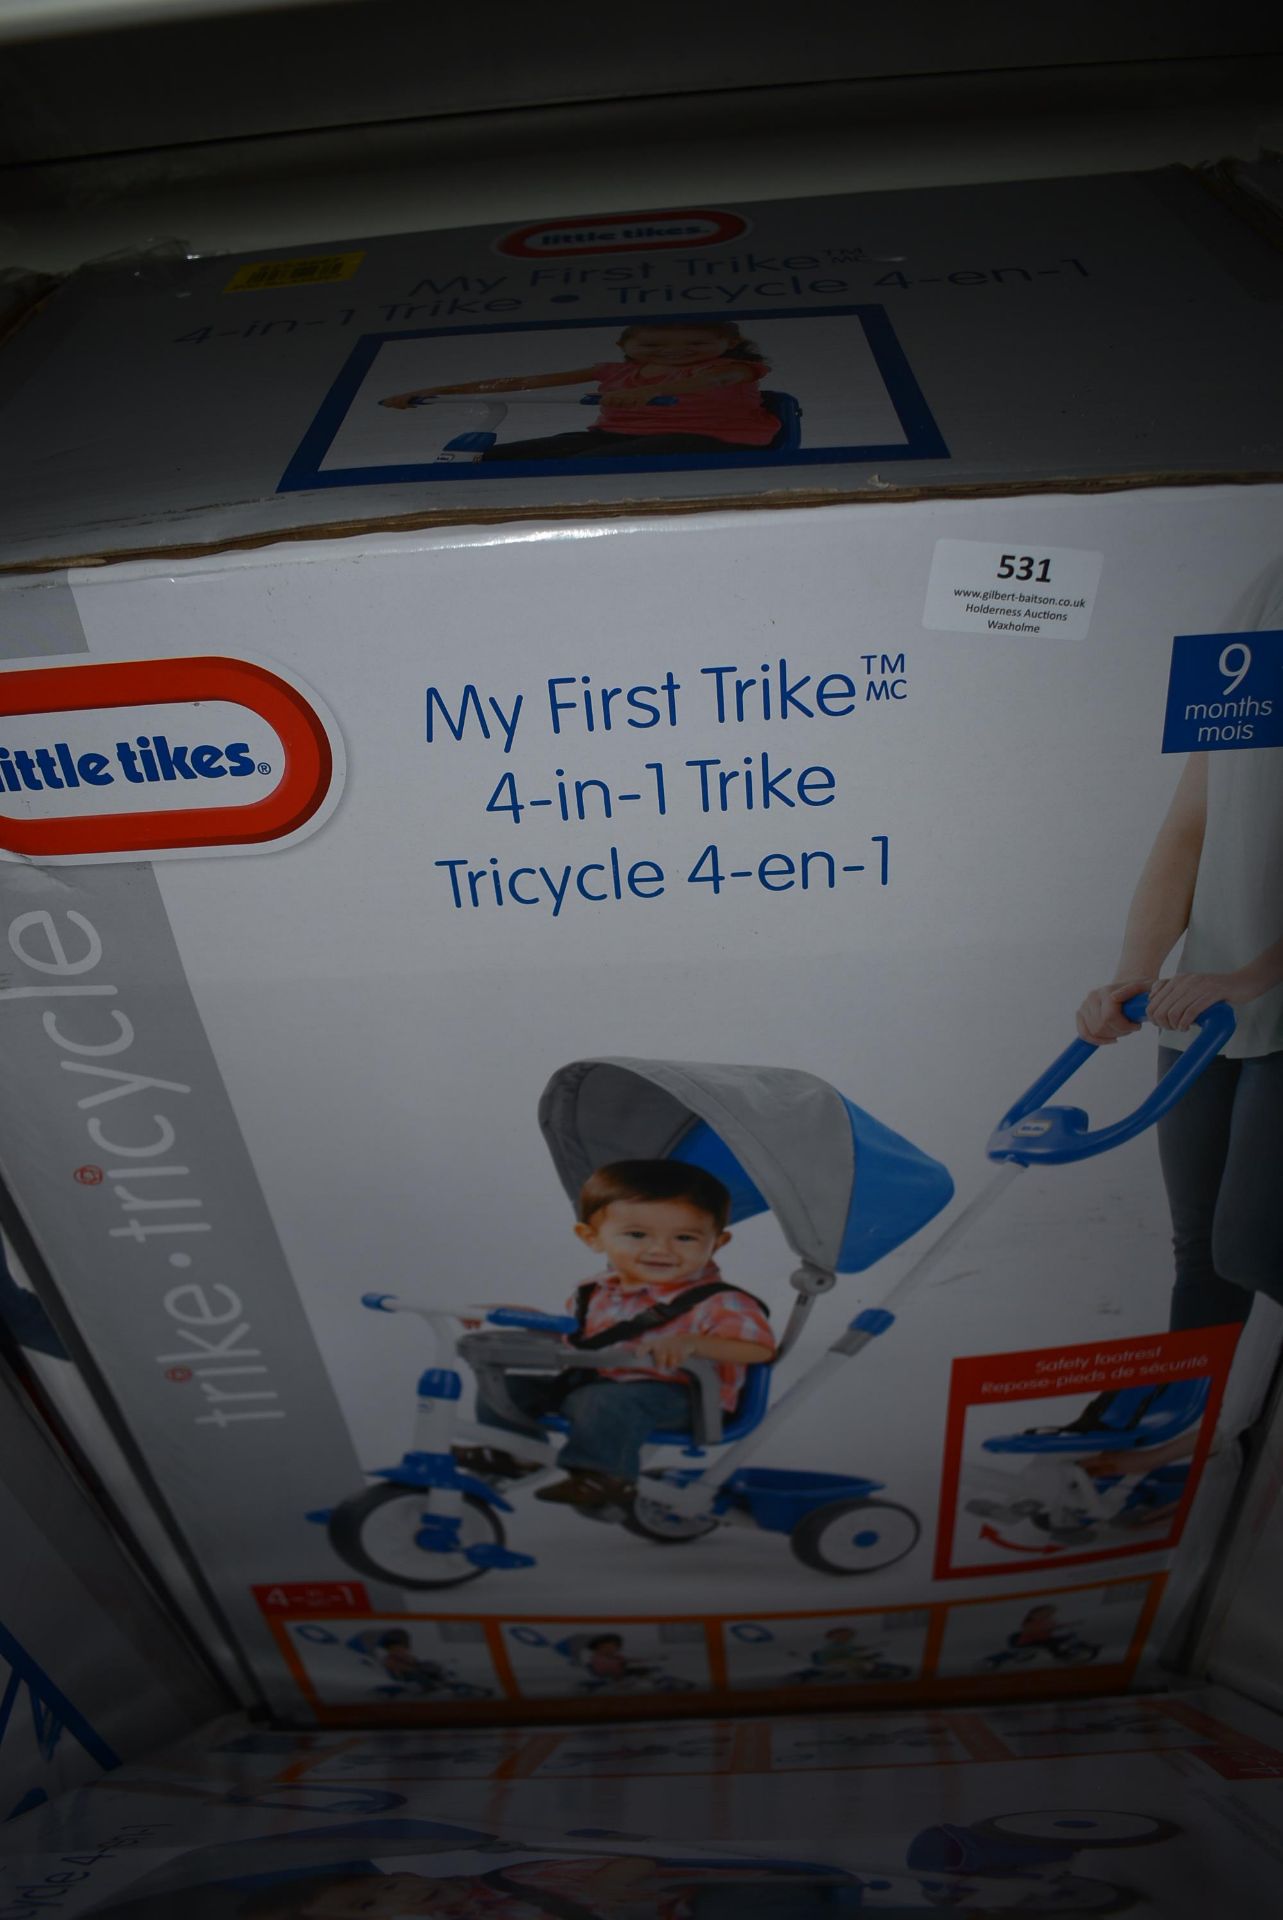 Little Tikes 4-in-1 Tricycle 9m – 5y (blue & grey)